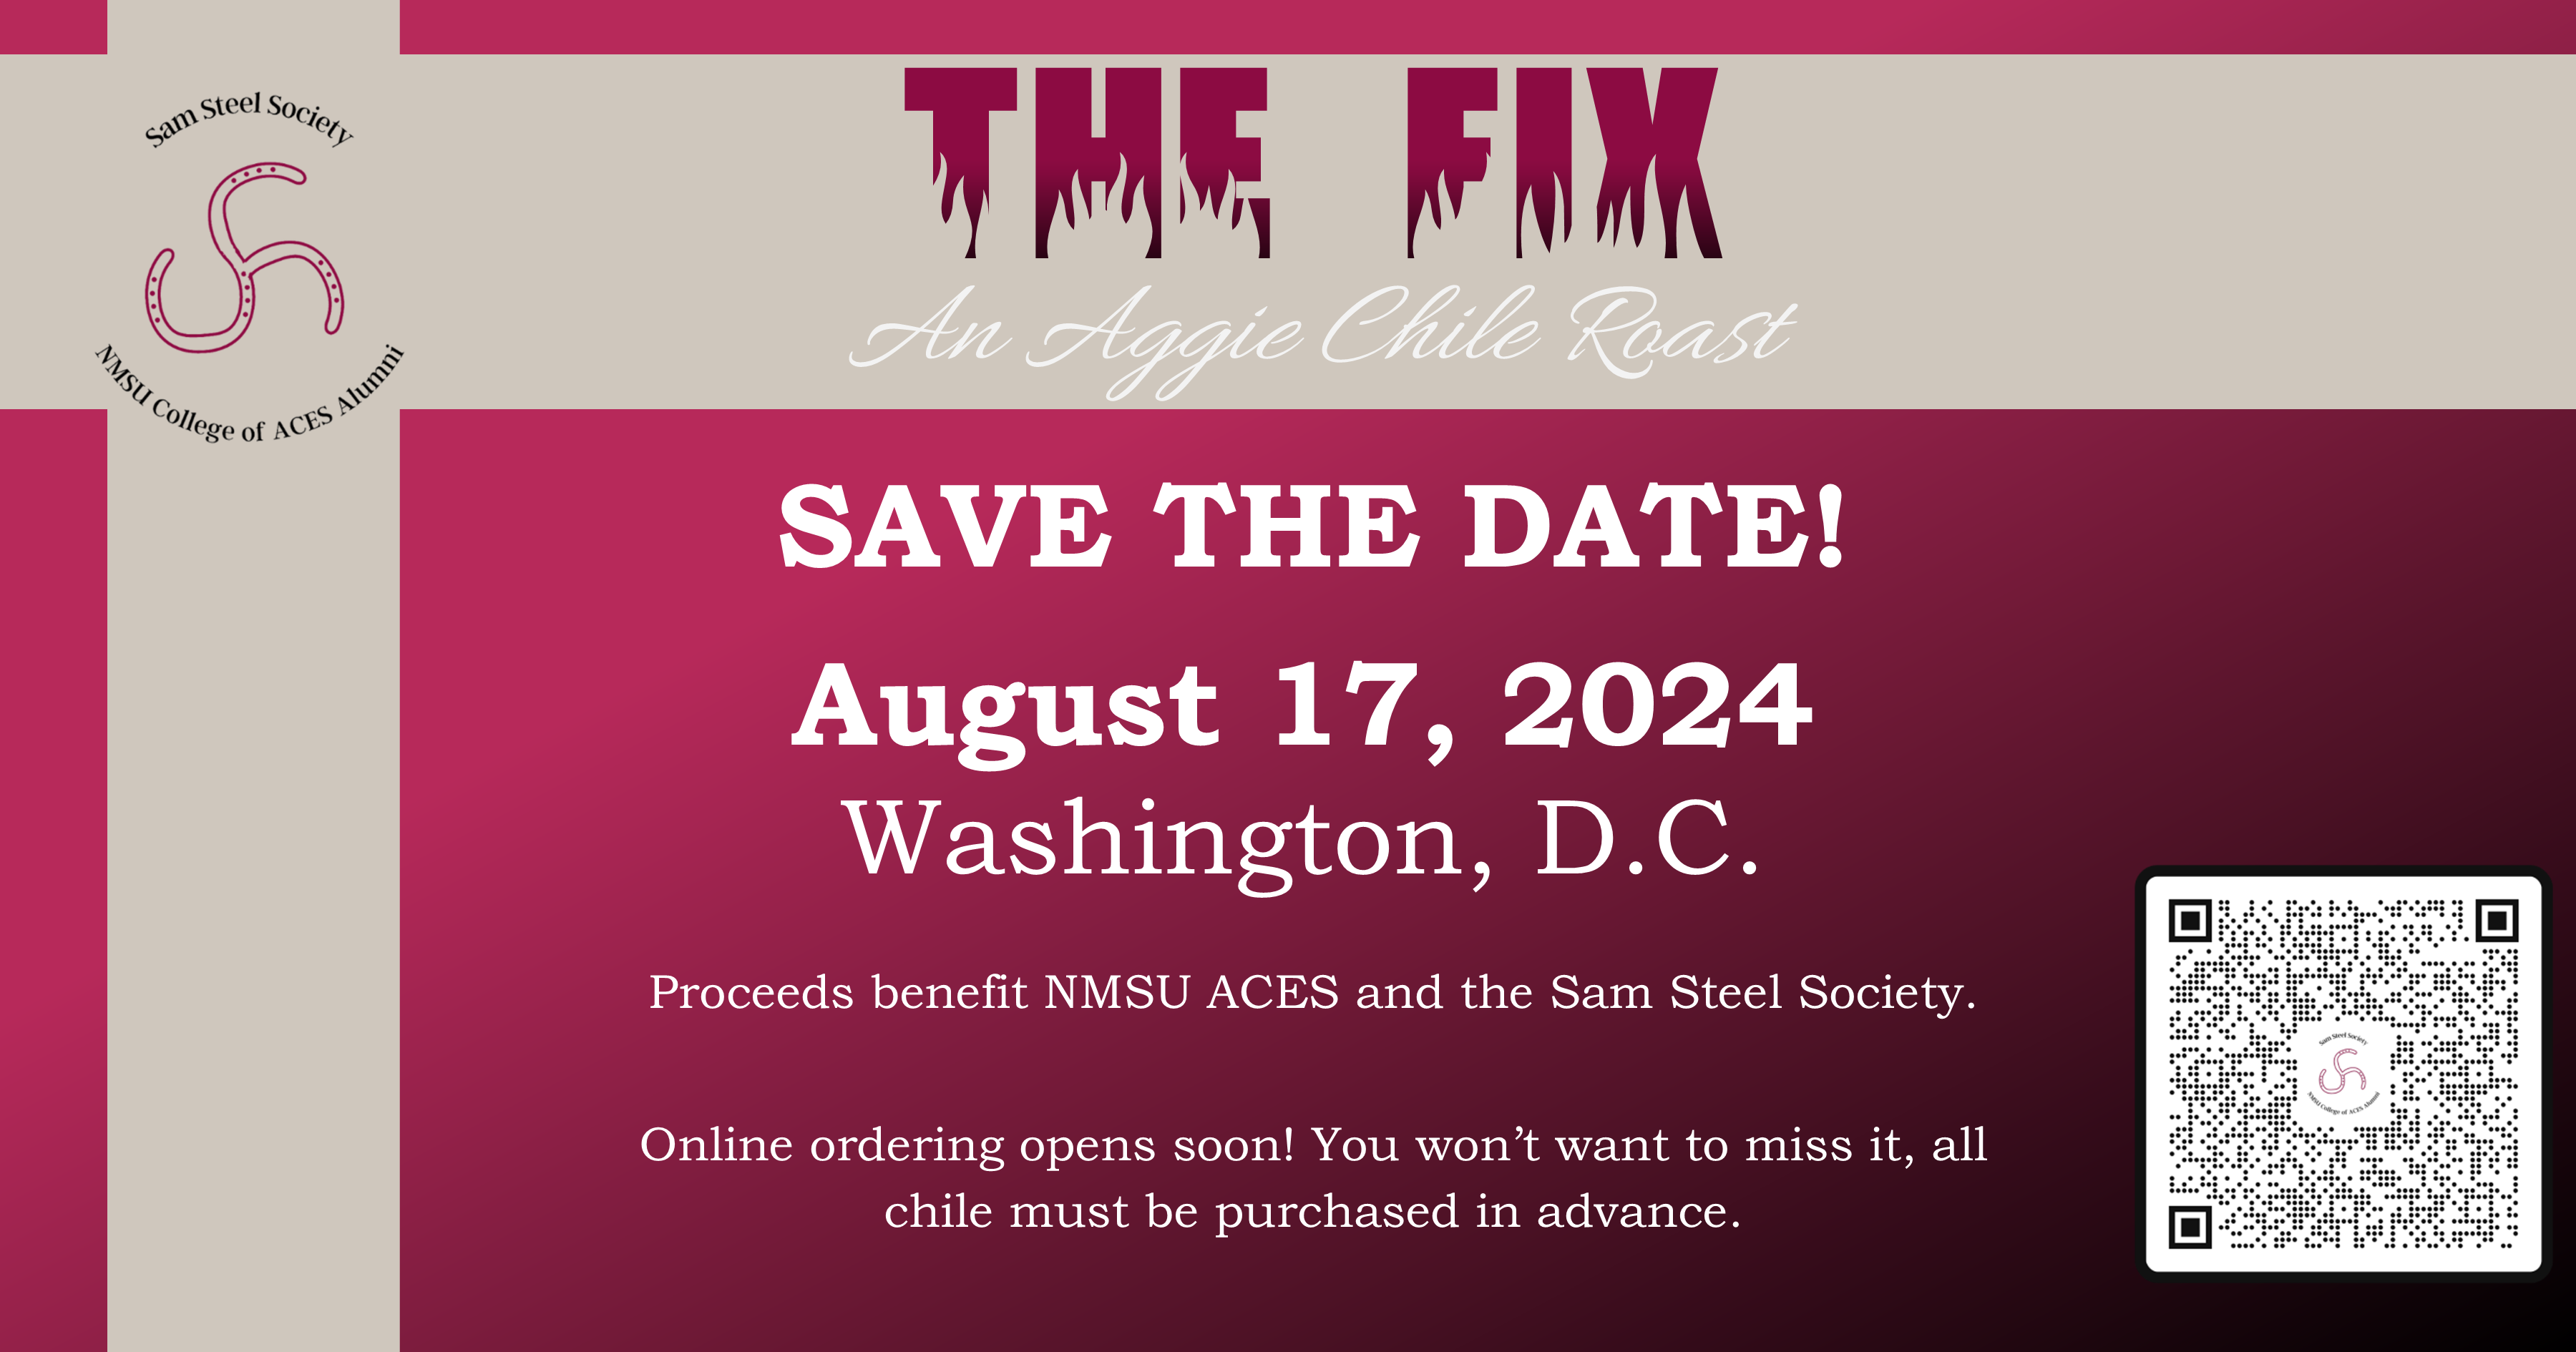 The Fix Chile Roast in Washington DC Save the Date